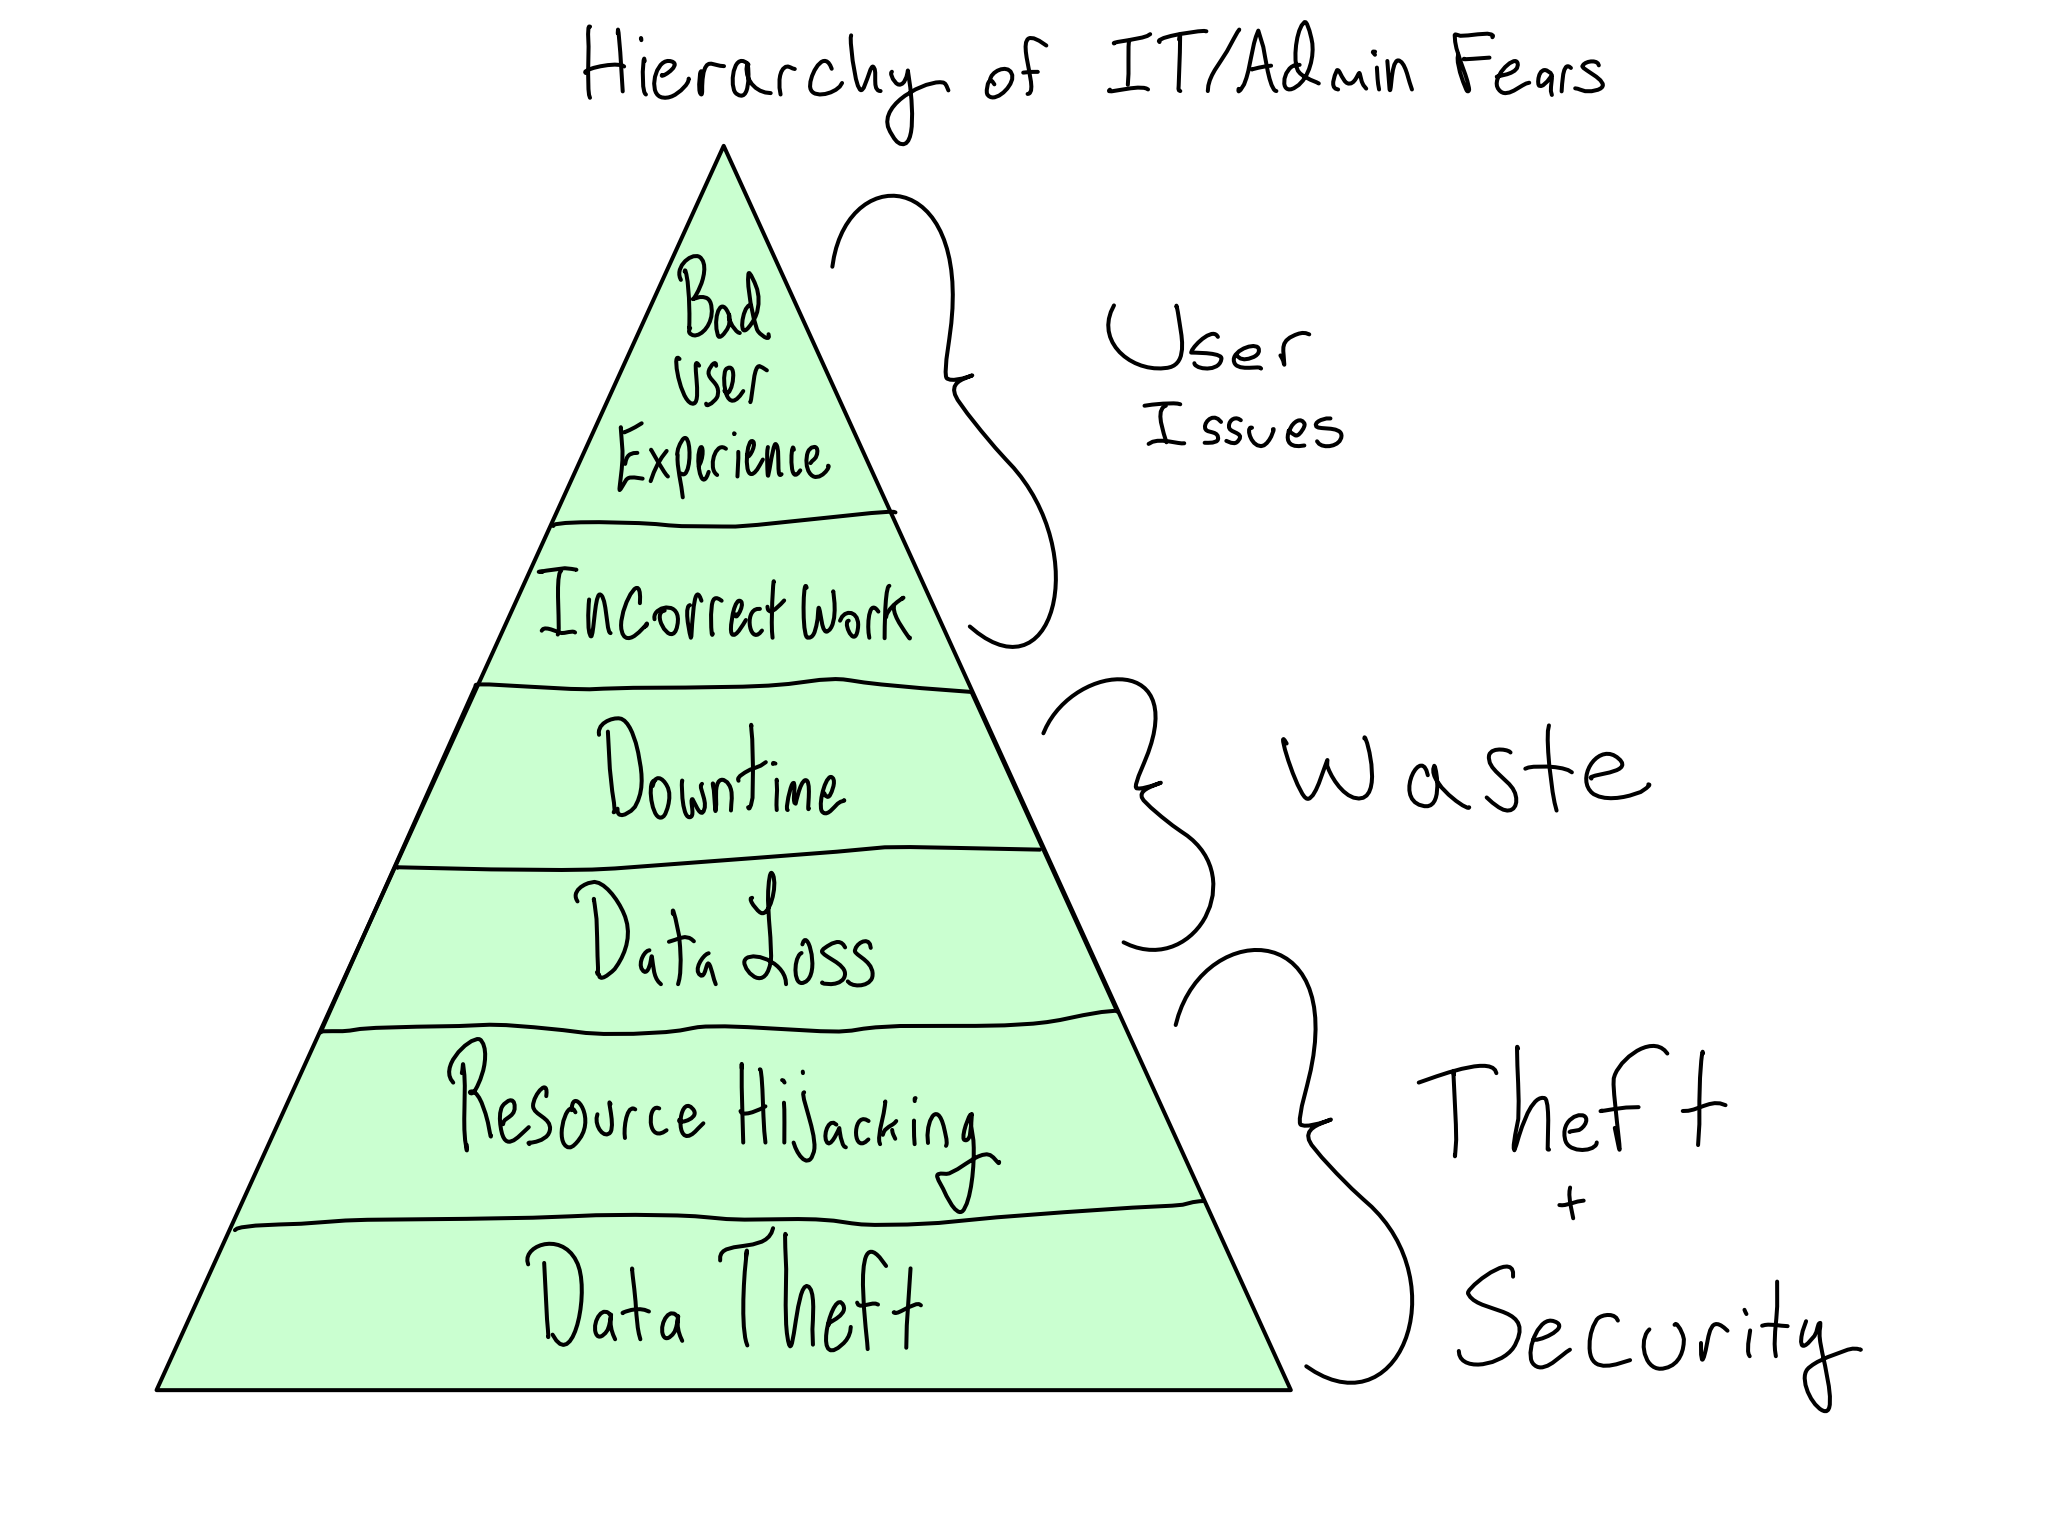 A hierarchy of IT/Admin concerns. From biggest to smallest: data theft, resource hijacking, data loss, lost time, incorrect work, good user experience.